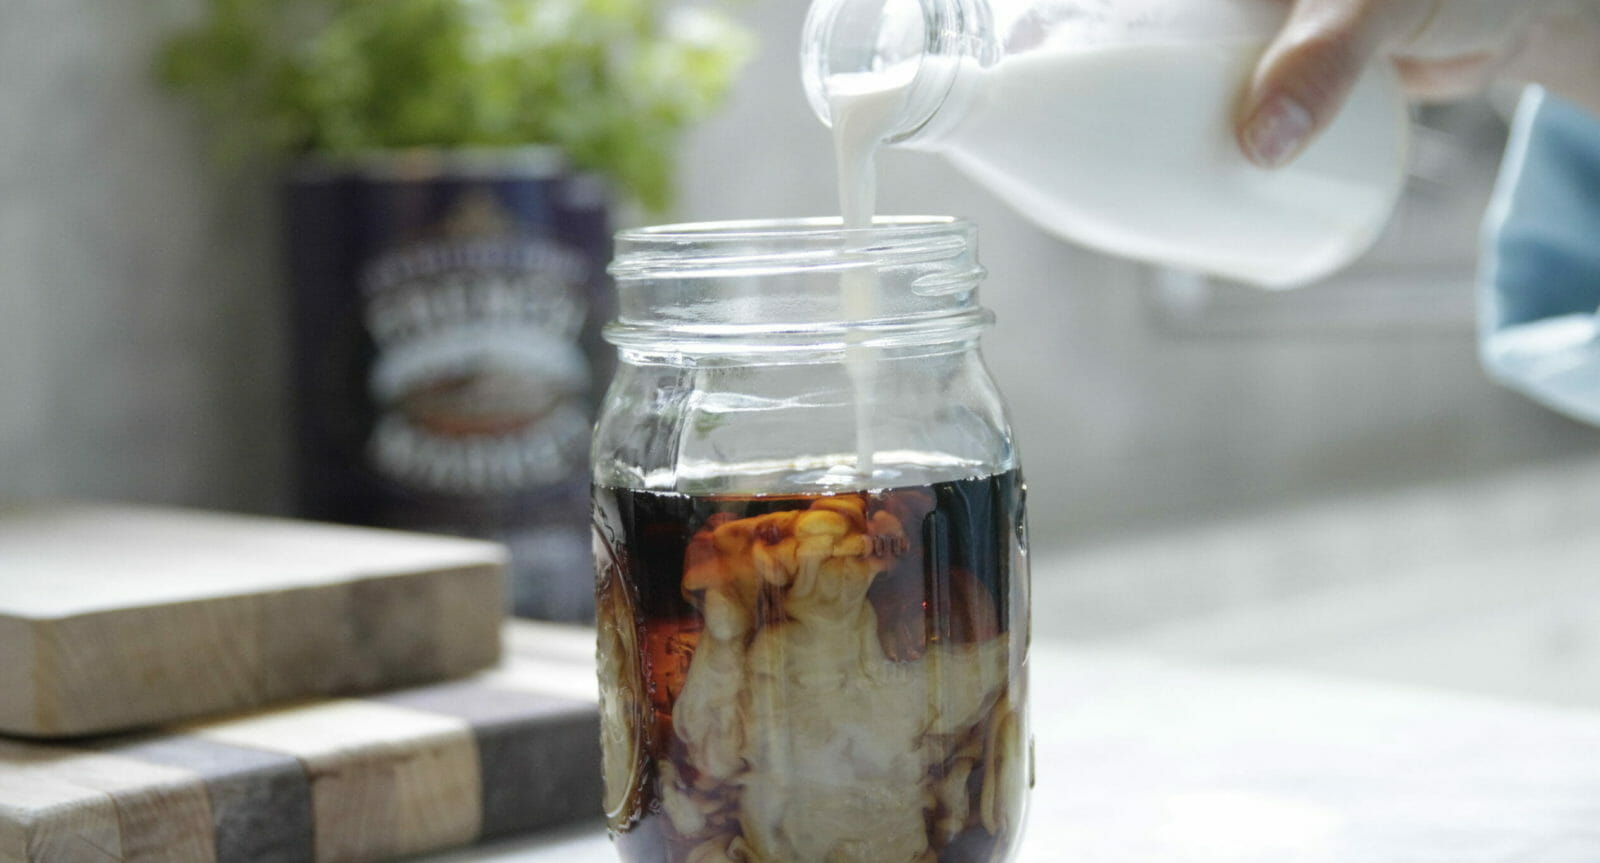 New Orleans Iced Coffee